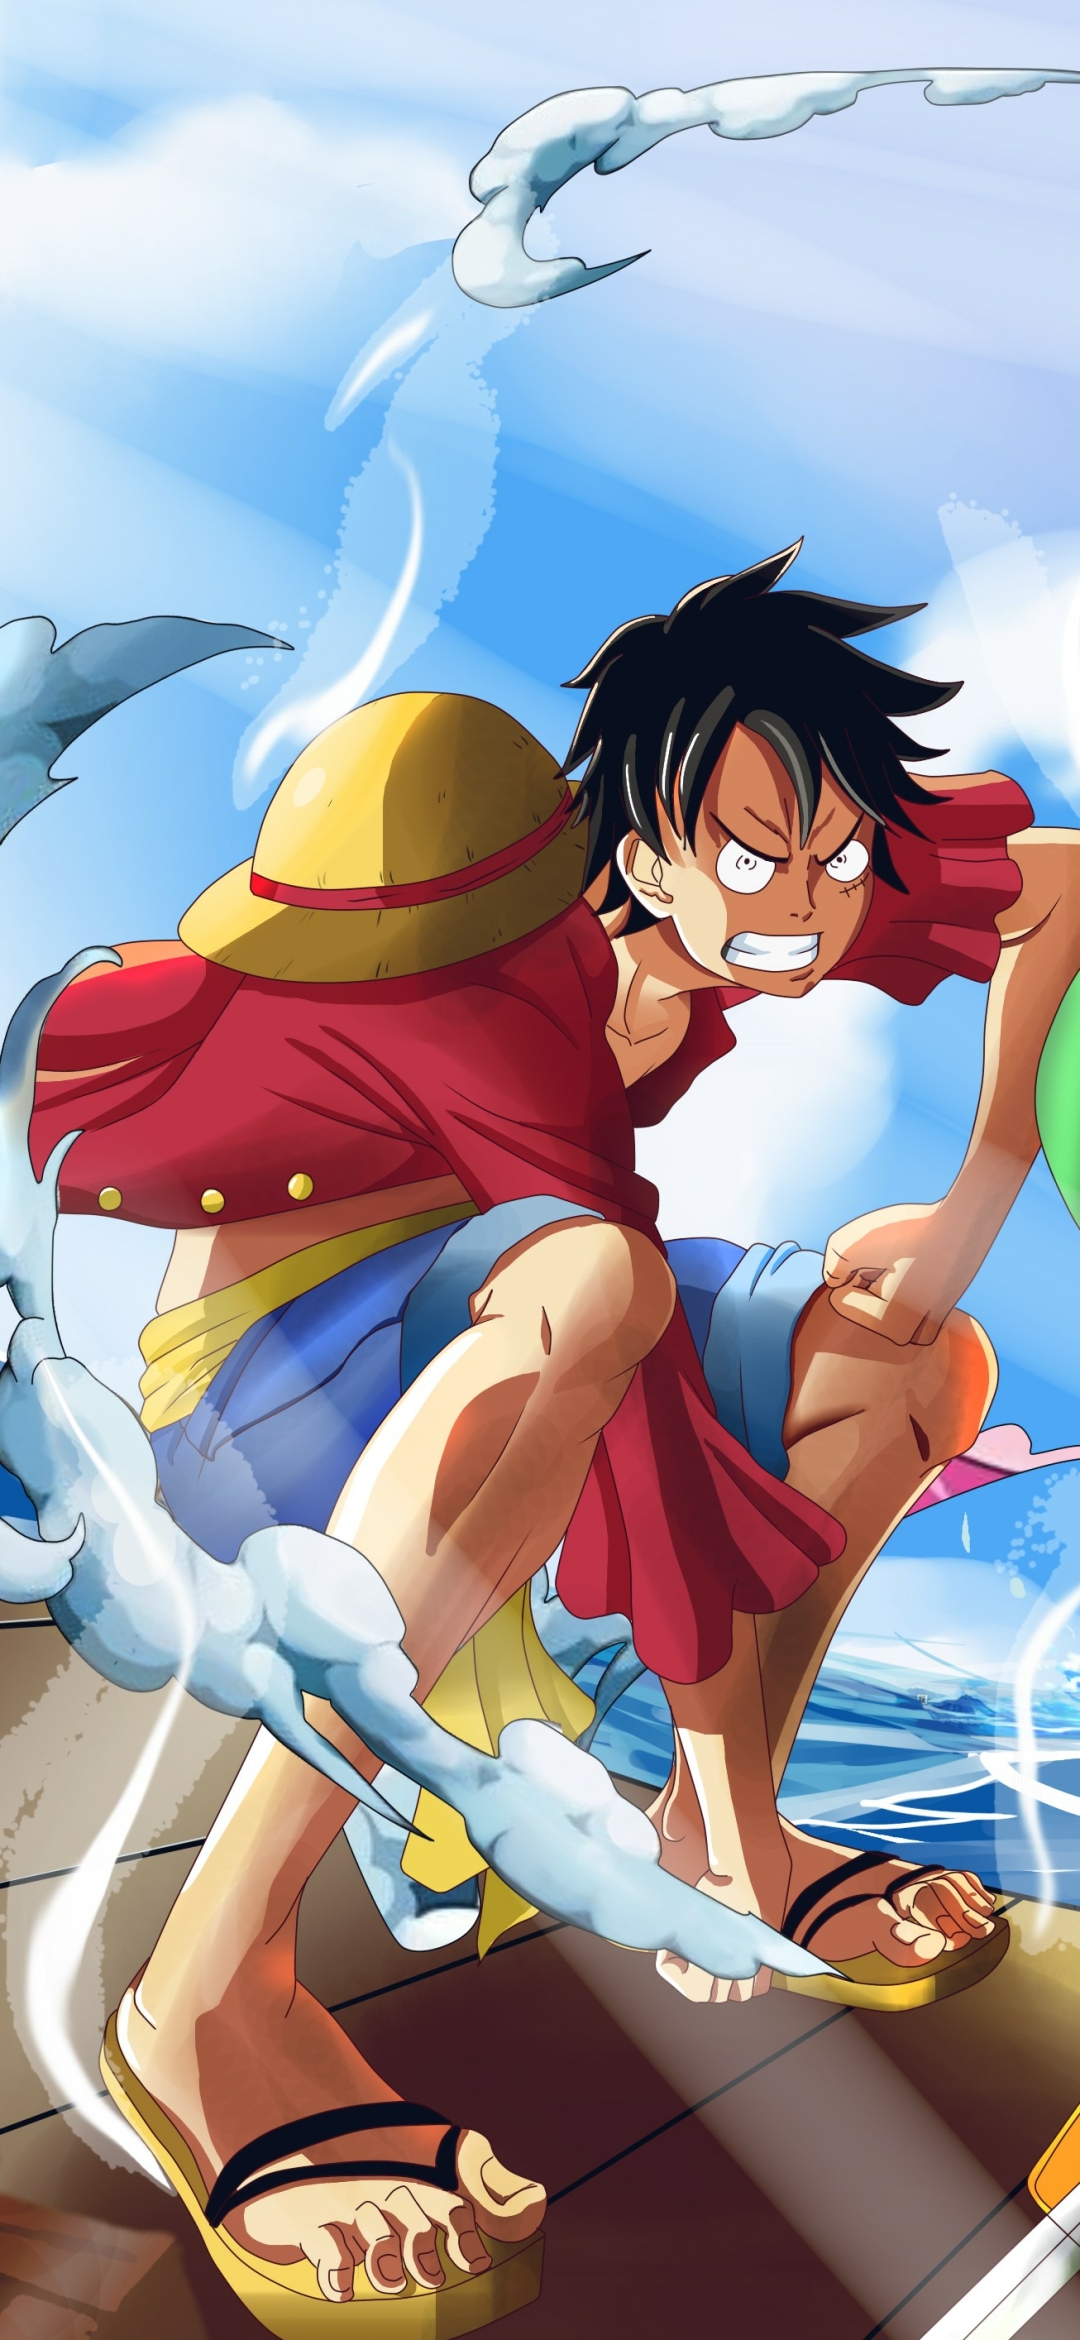 Anime One Piece Phone Wallpaper - Mobile Abyss